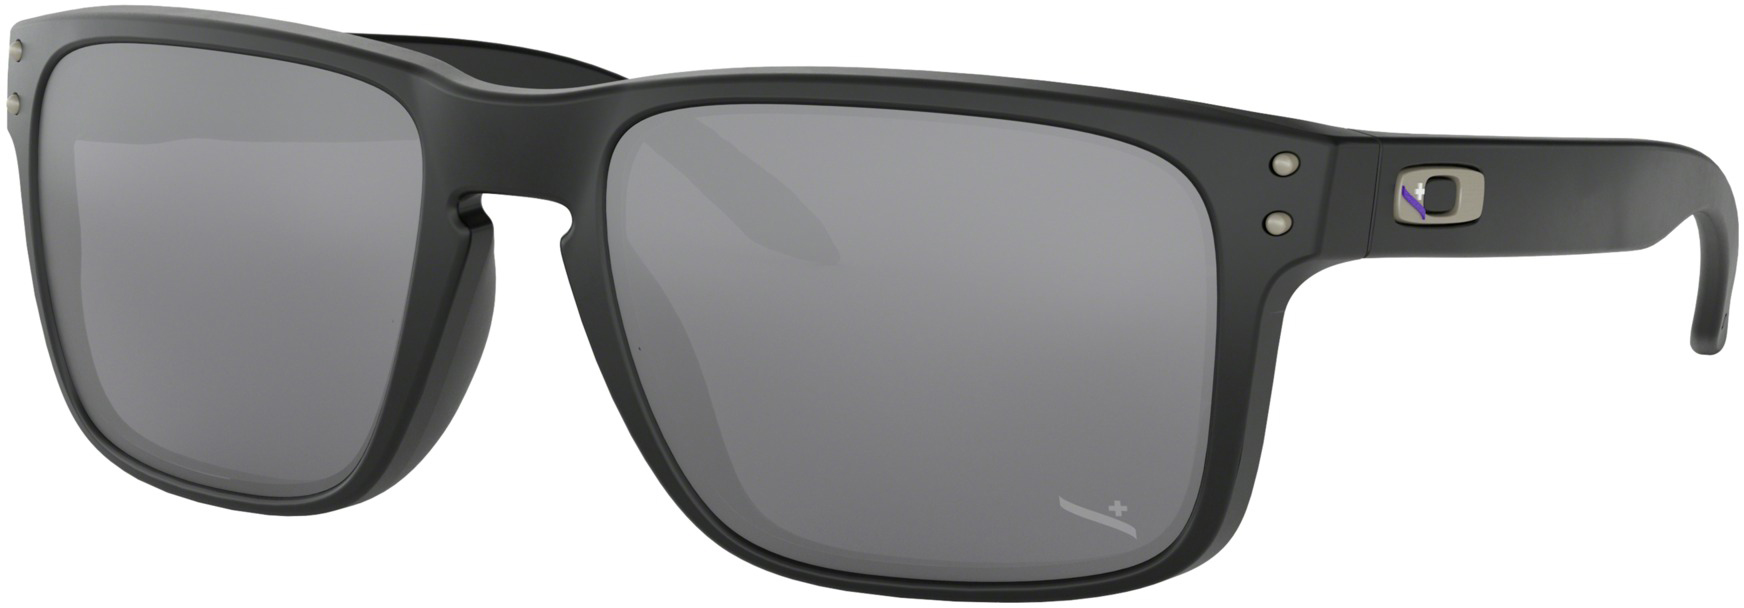 Oakley Holbrook Infinite Hero Collection Sunglasses | w/ Free Shipping and  Handling